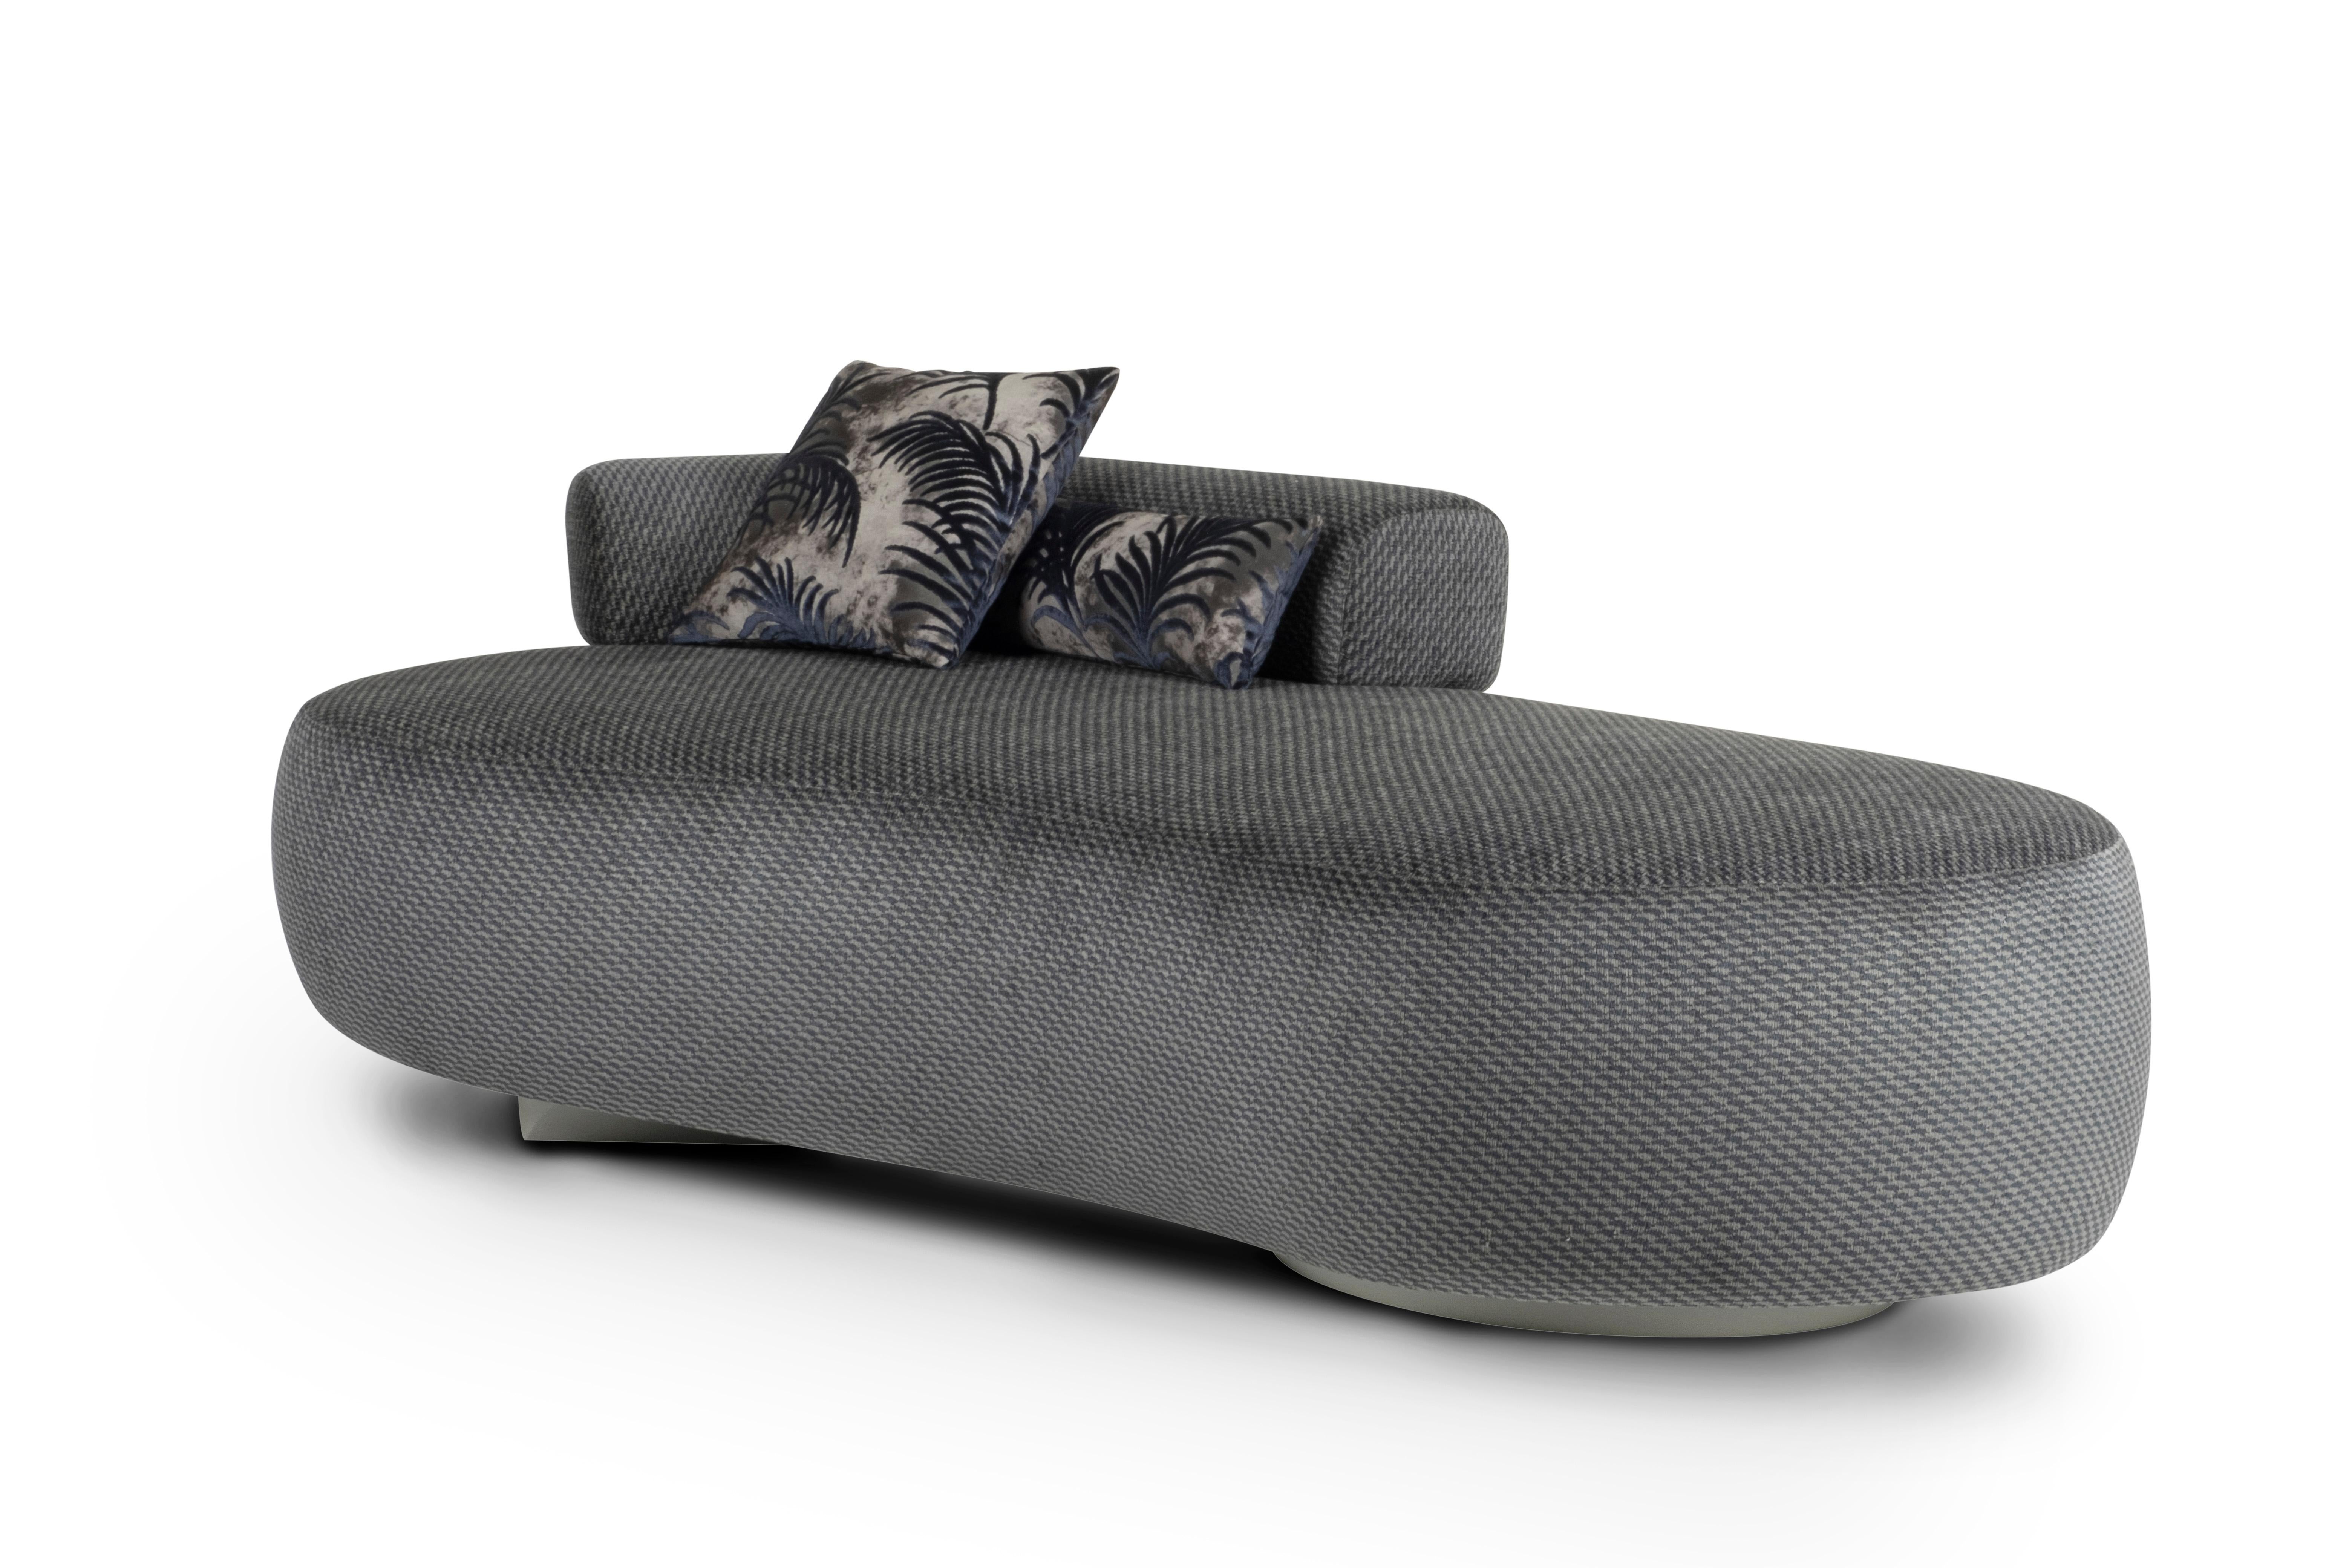 Twins Chaise Lounge, Contemporary Collection, Handcrafted in Portugal - Europe by Greenapple.

Designed by Rute Martins for the Contemporary Collection, the Twins chaise lounge and curved sofa share the same genes, yet each possesses a distinct